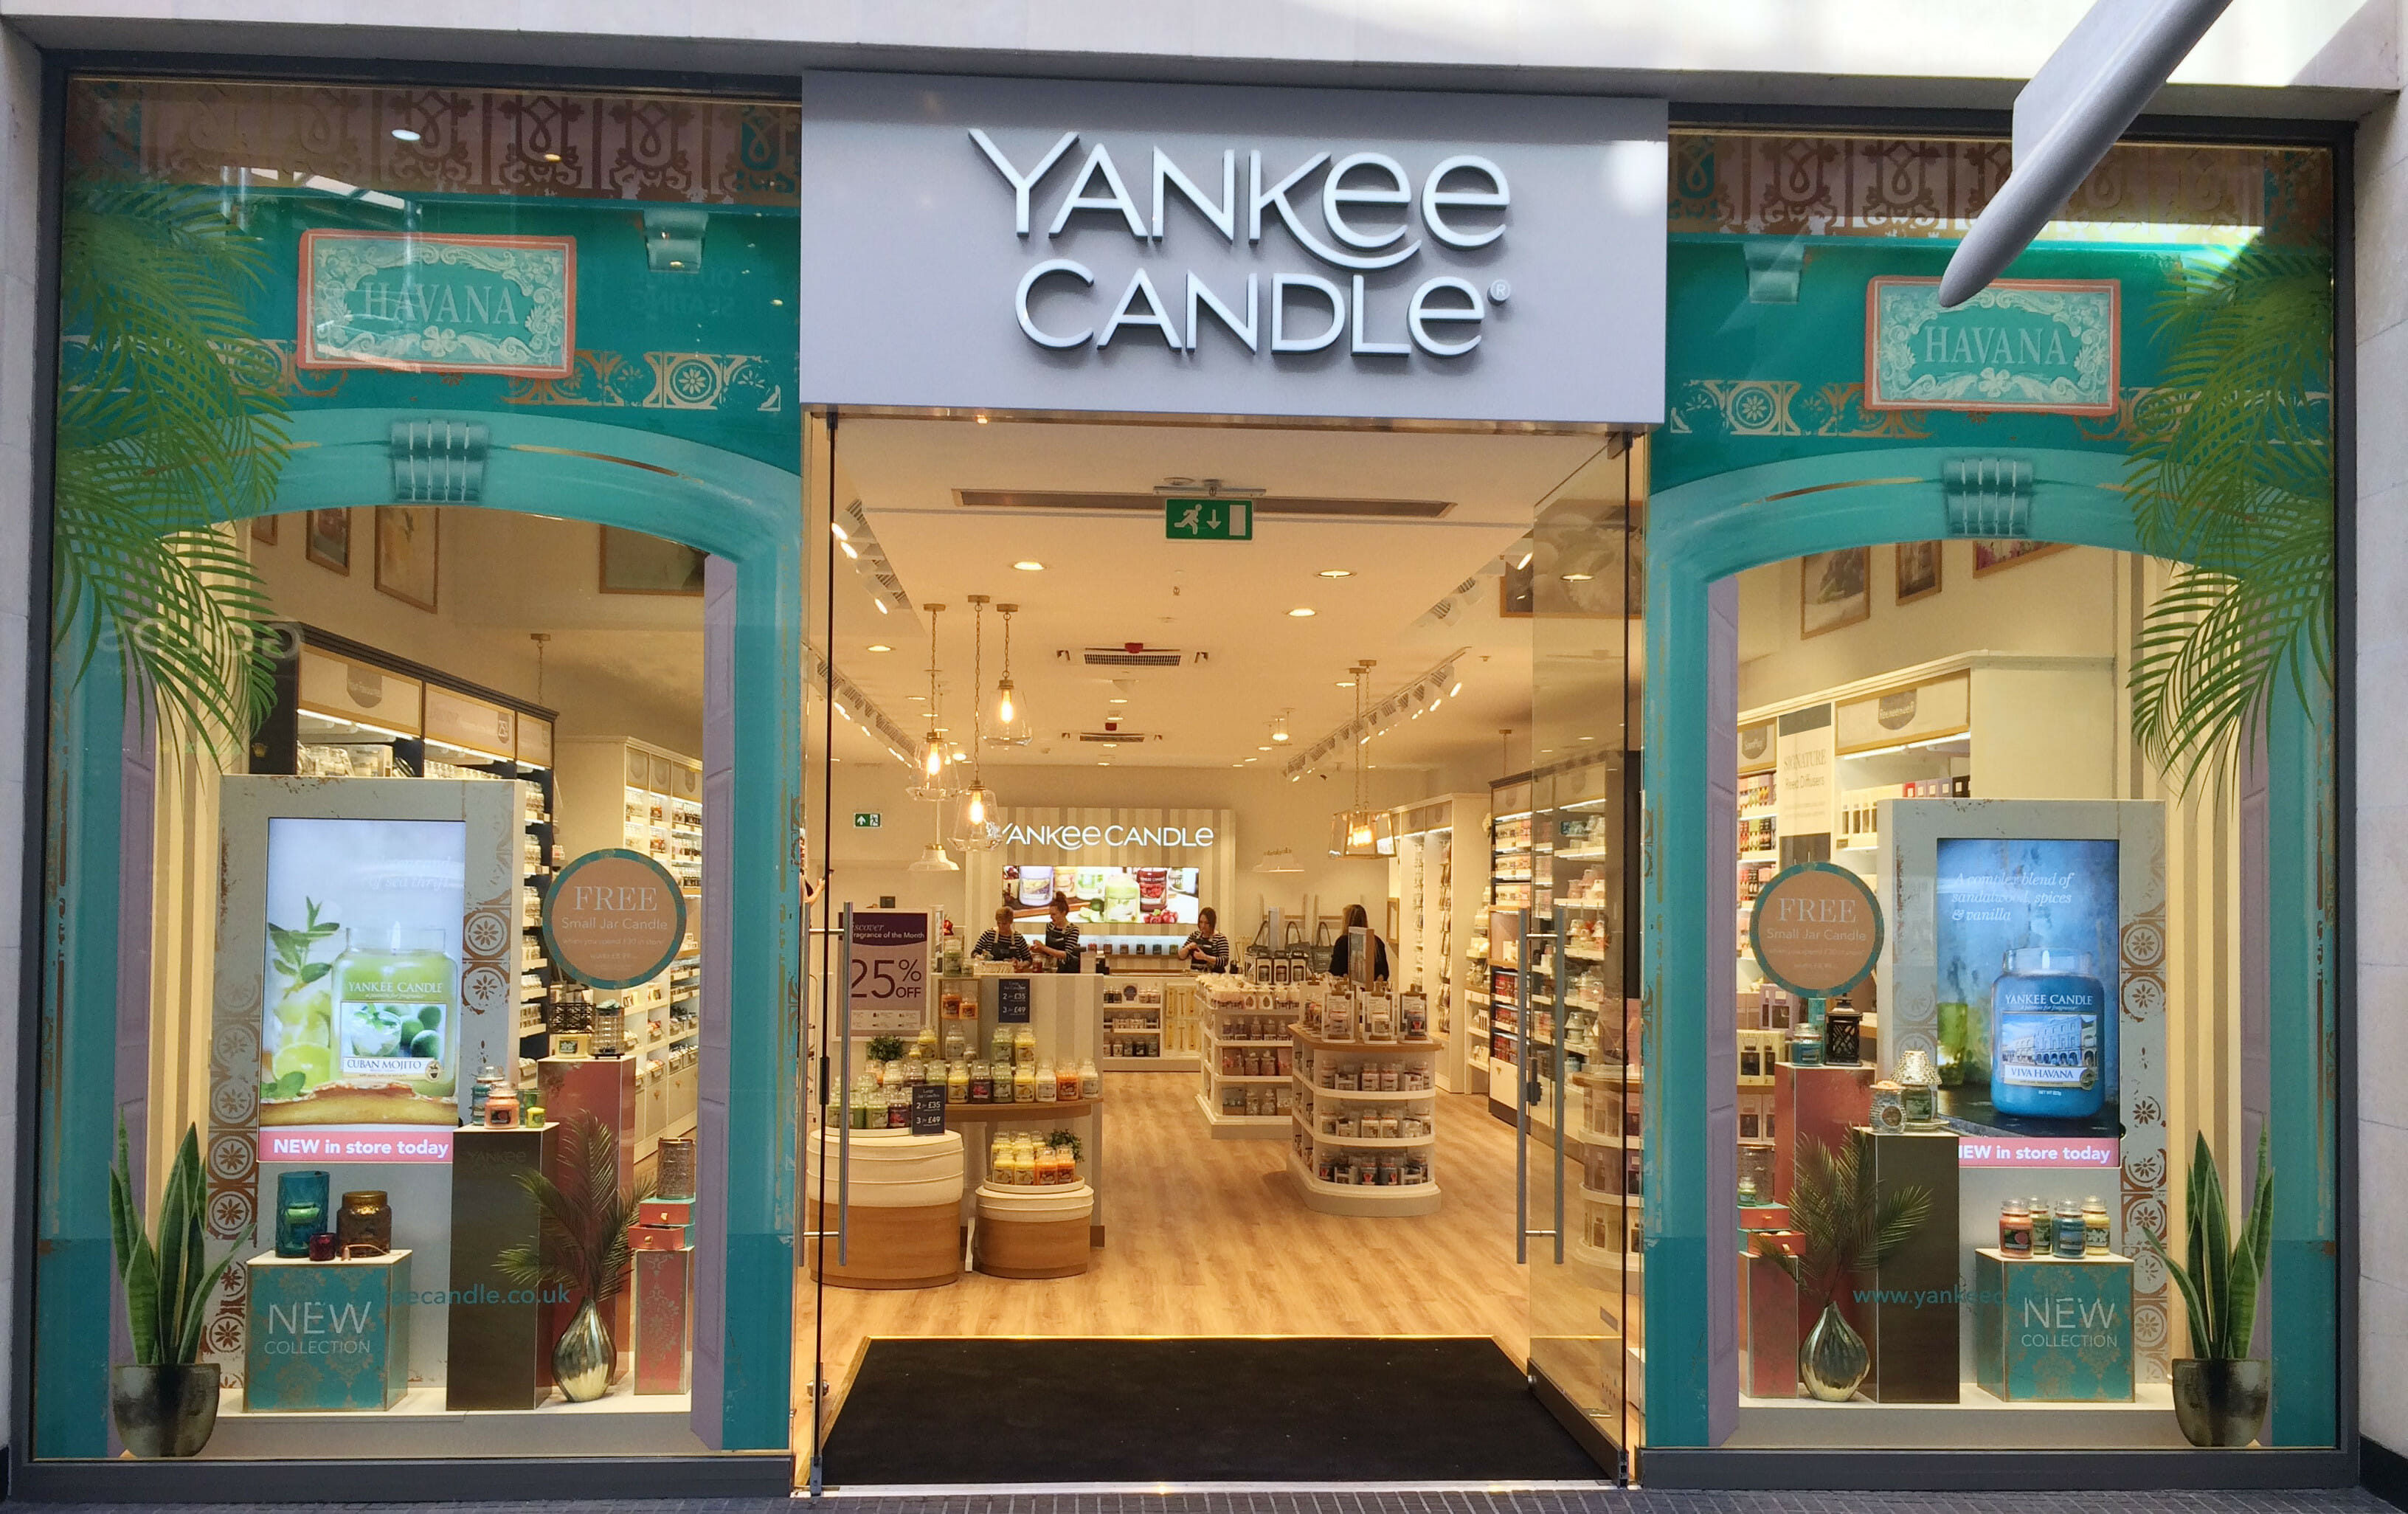 Yankee Candle store to open at Old Market